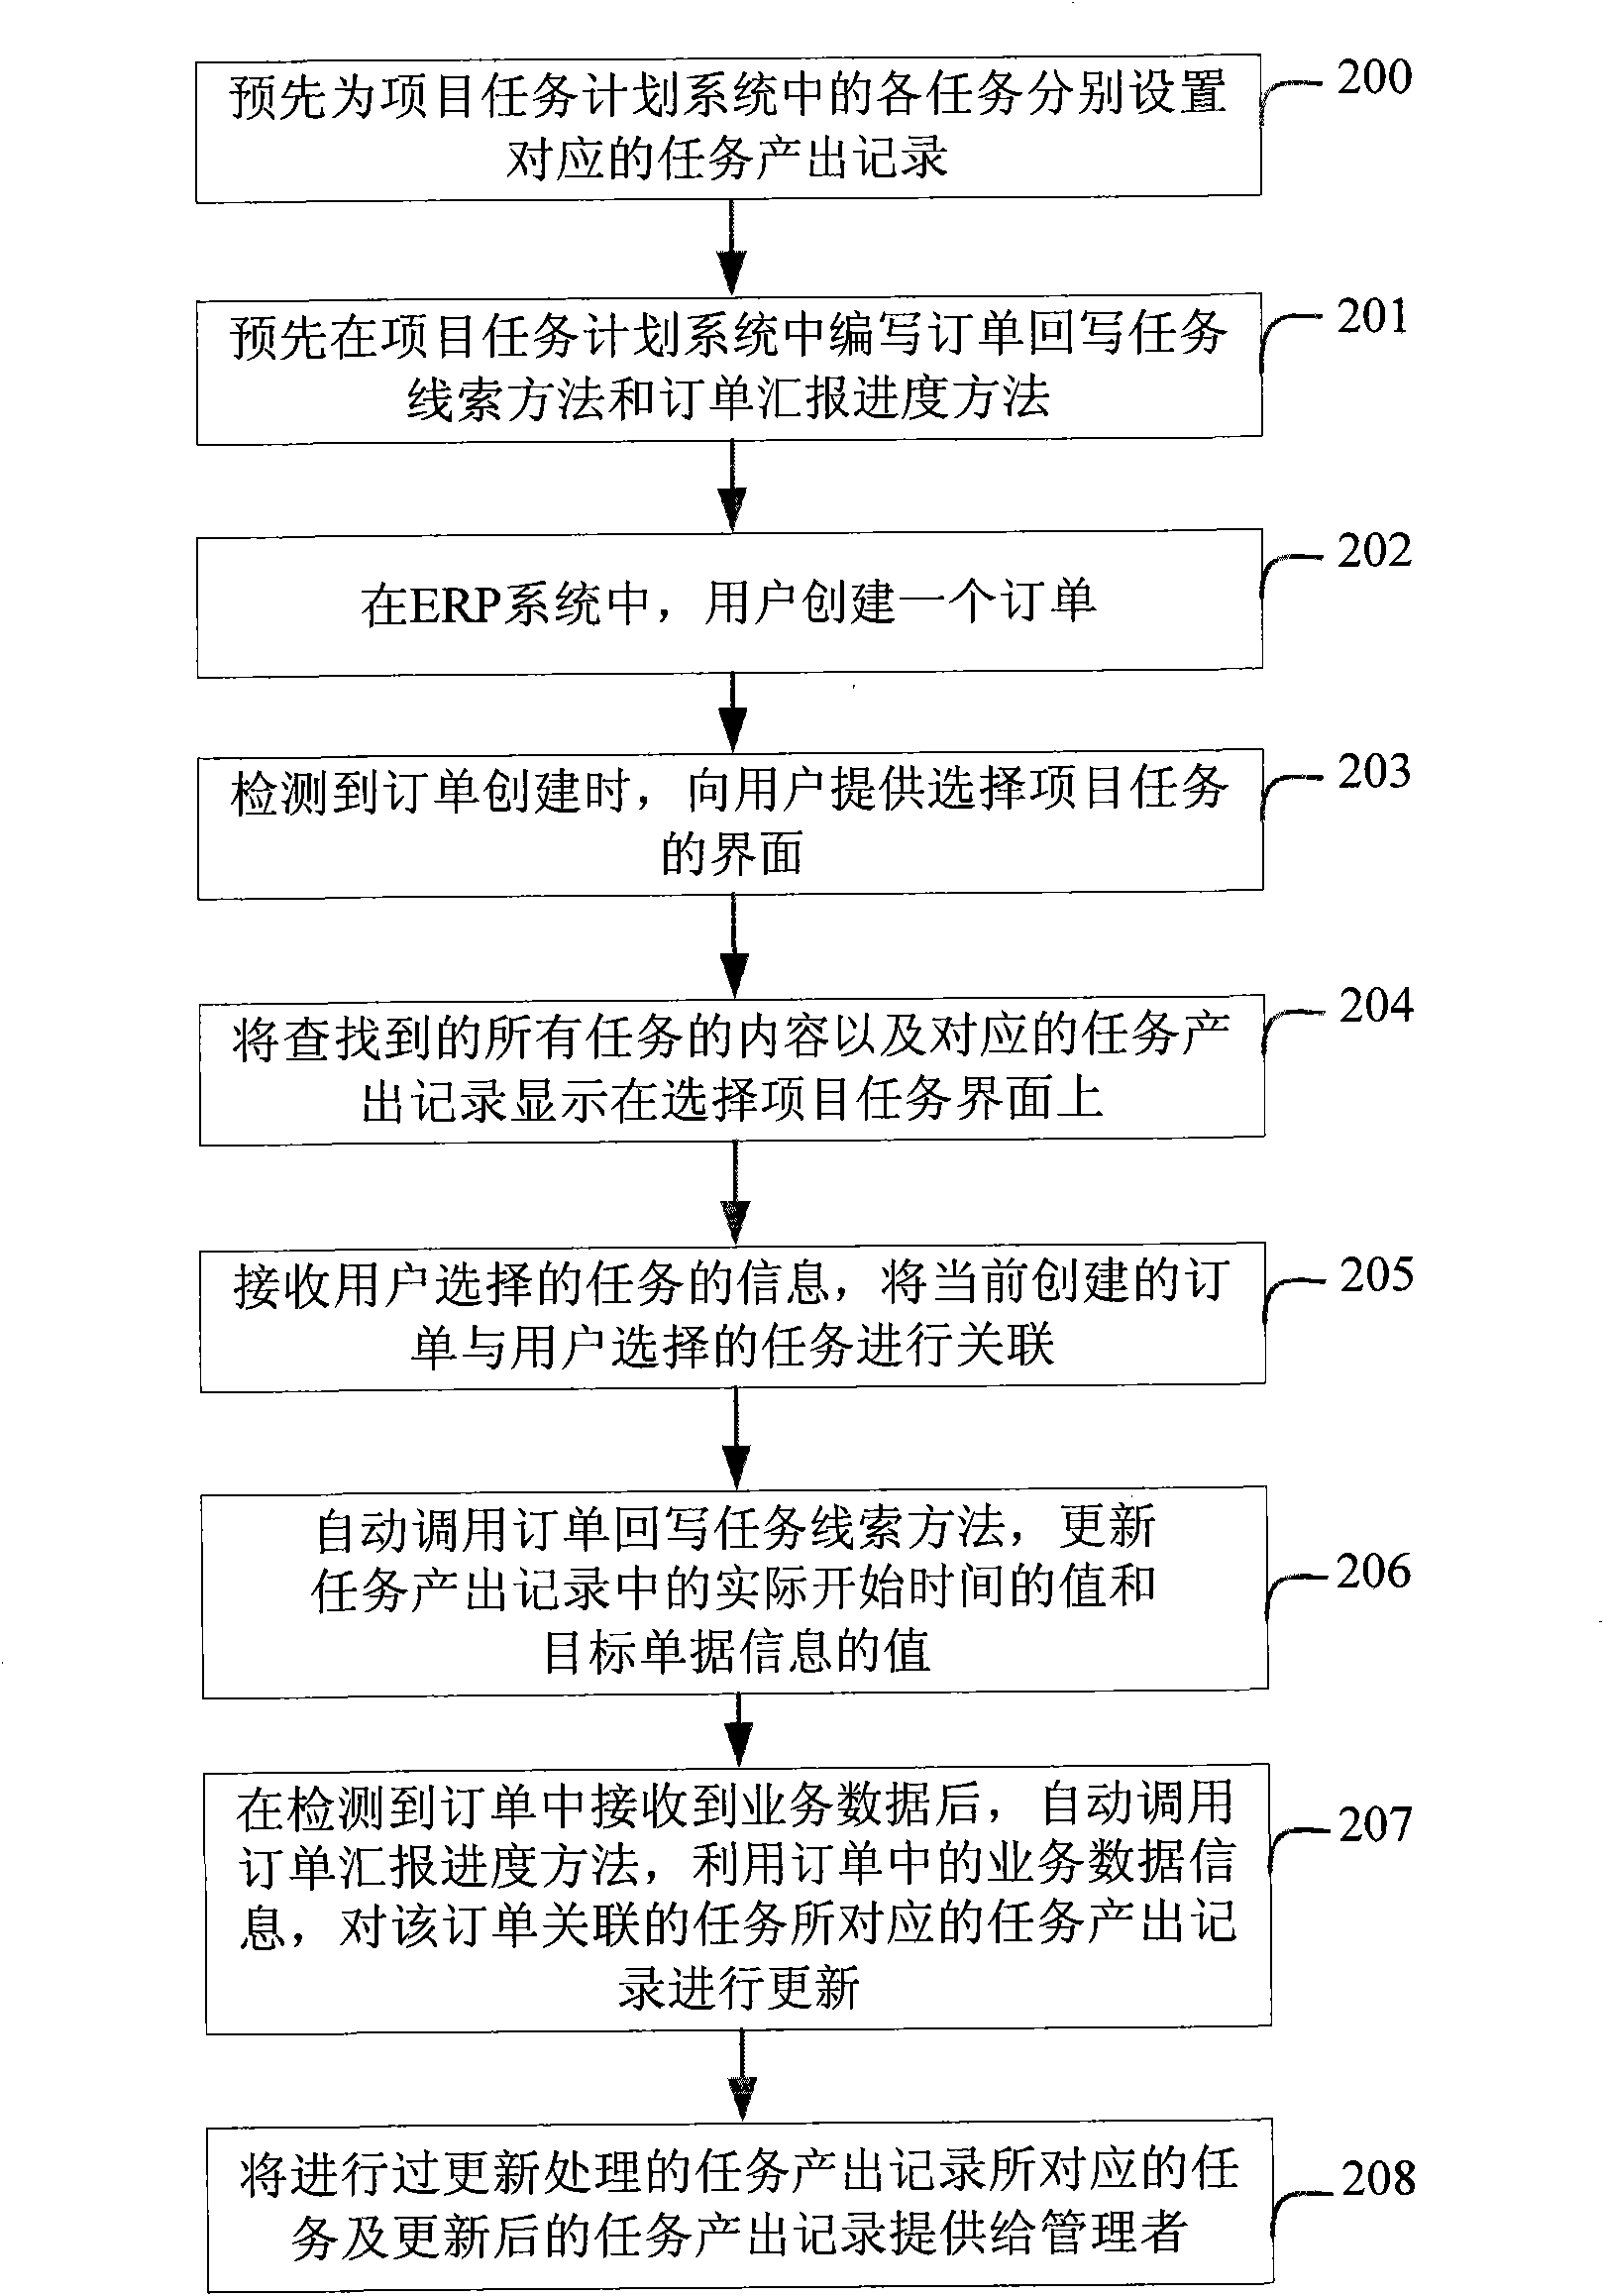 Method and device for updating task content in project task plan system